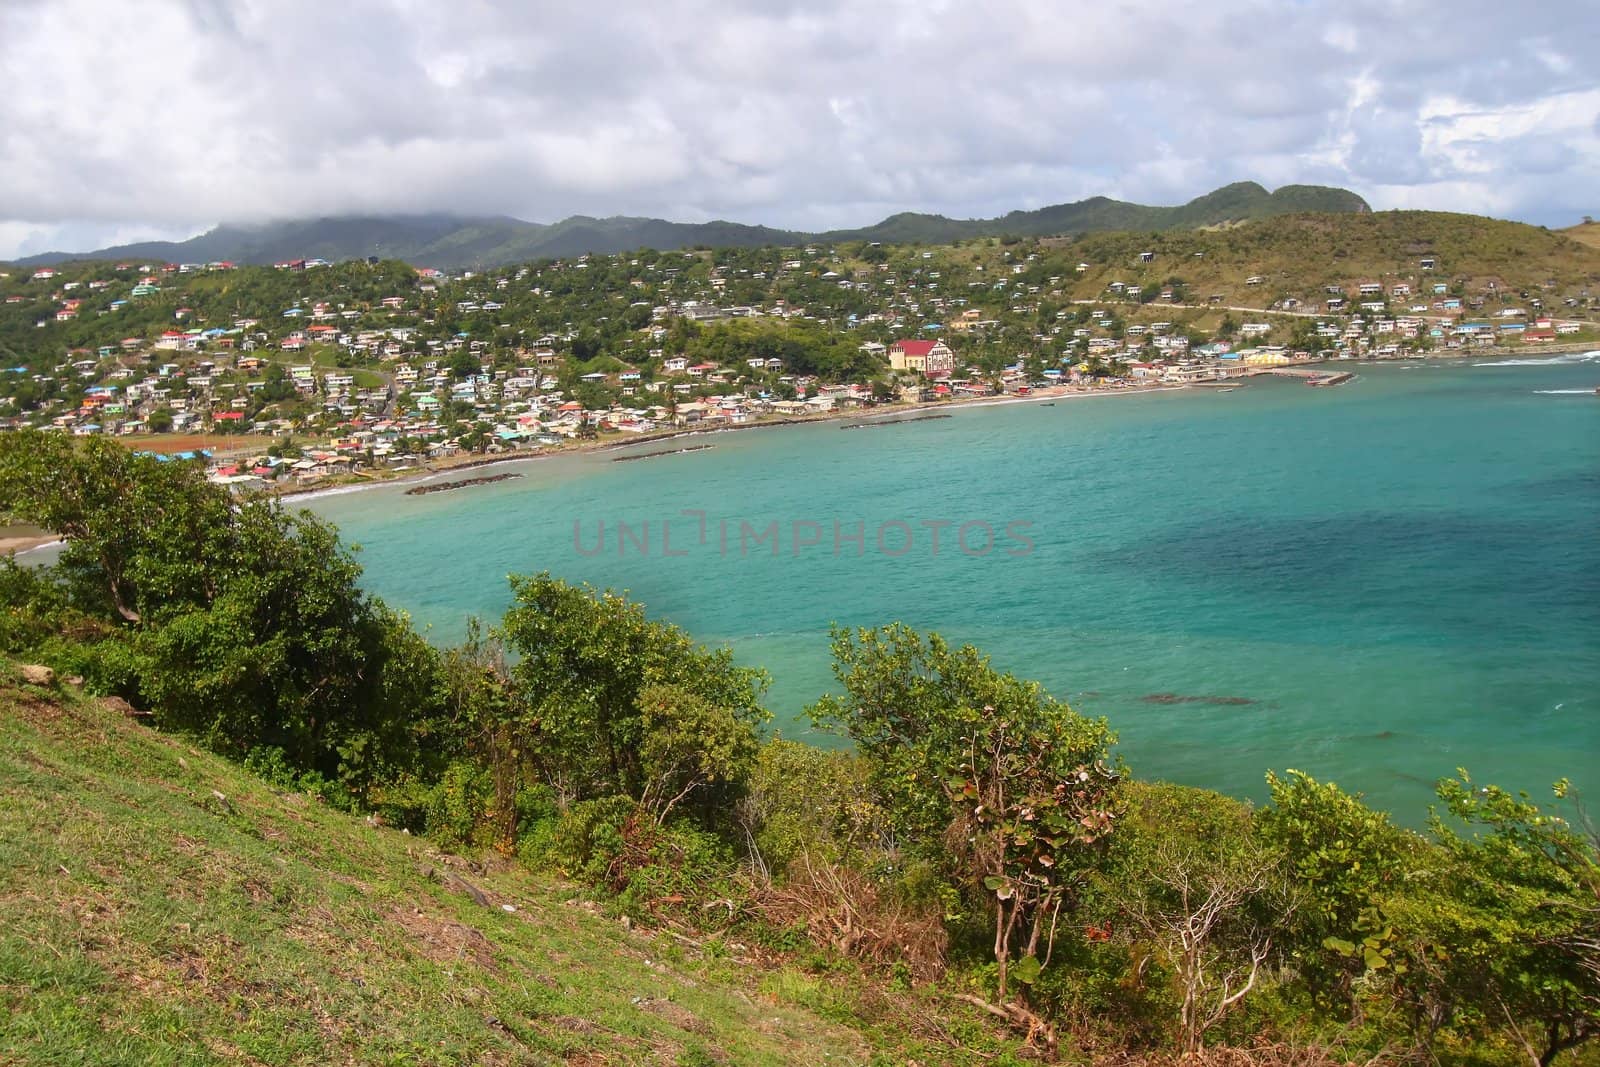 The town of Dennery on the Caribbean island of Saint Lucia